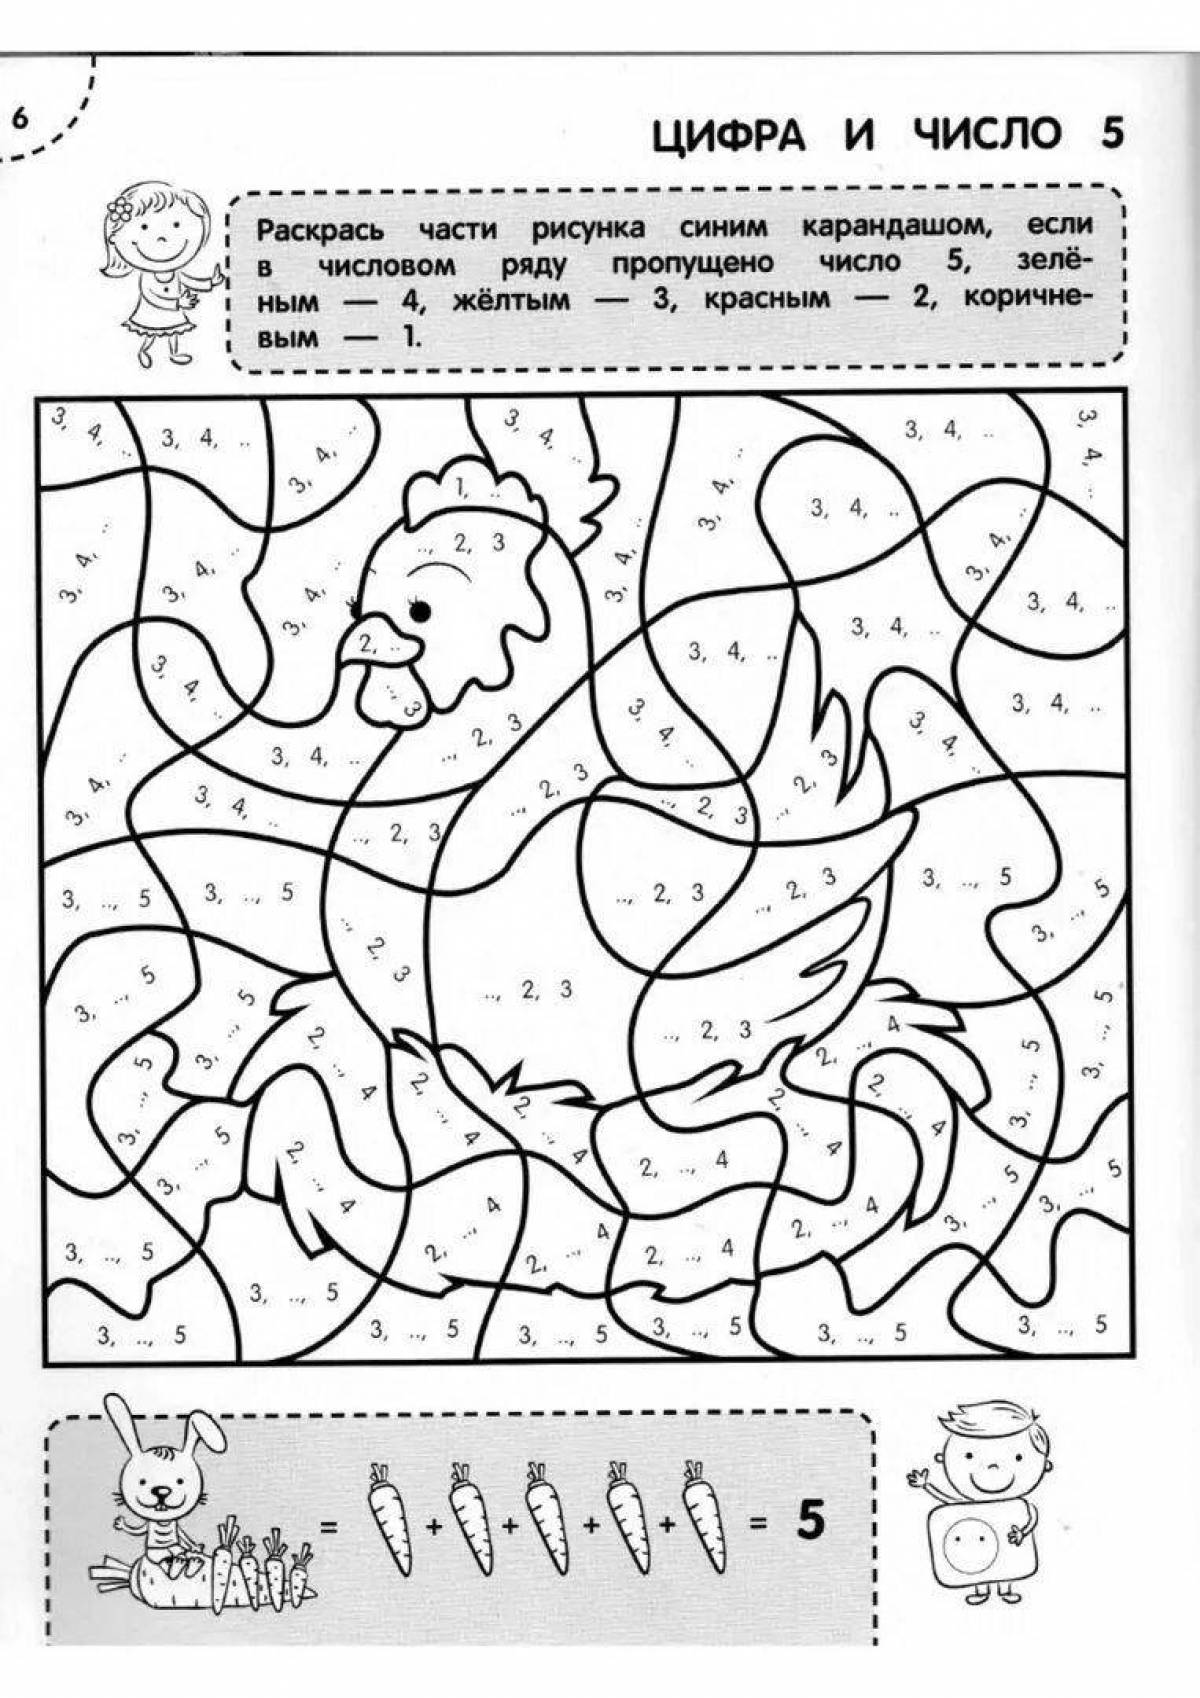 Humorous coloring page number 7 composition